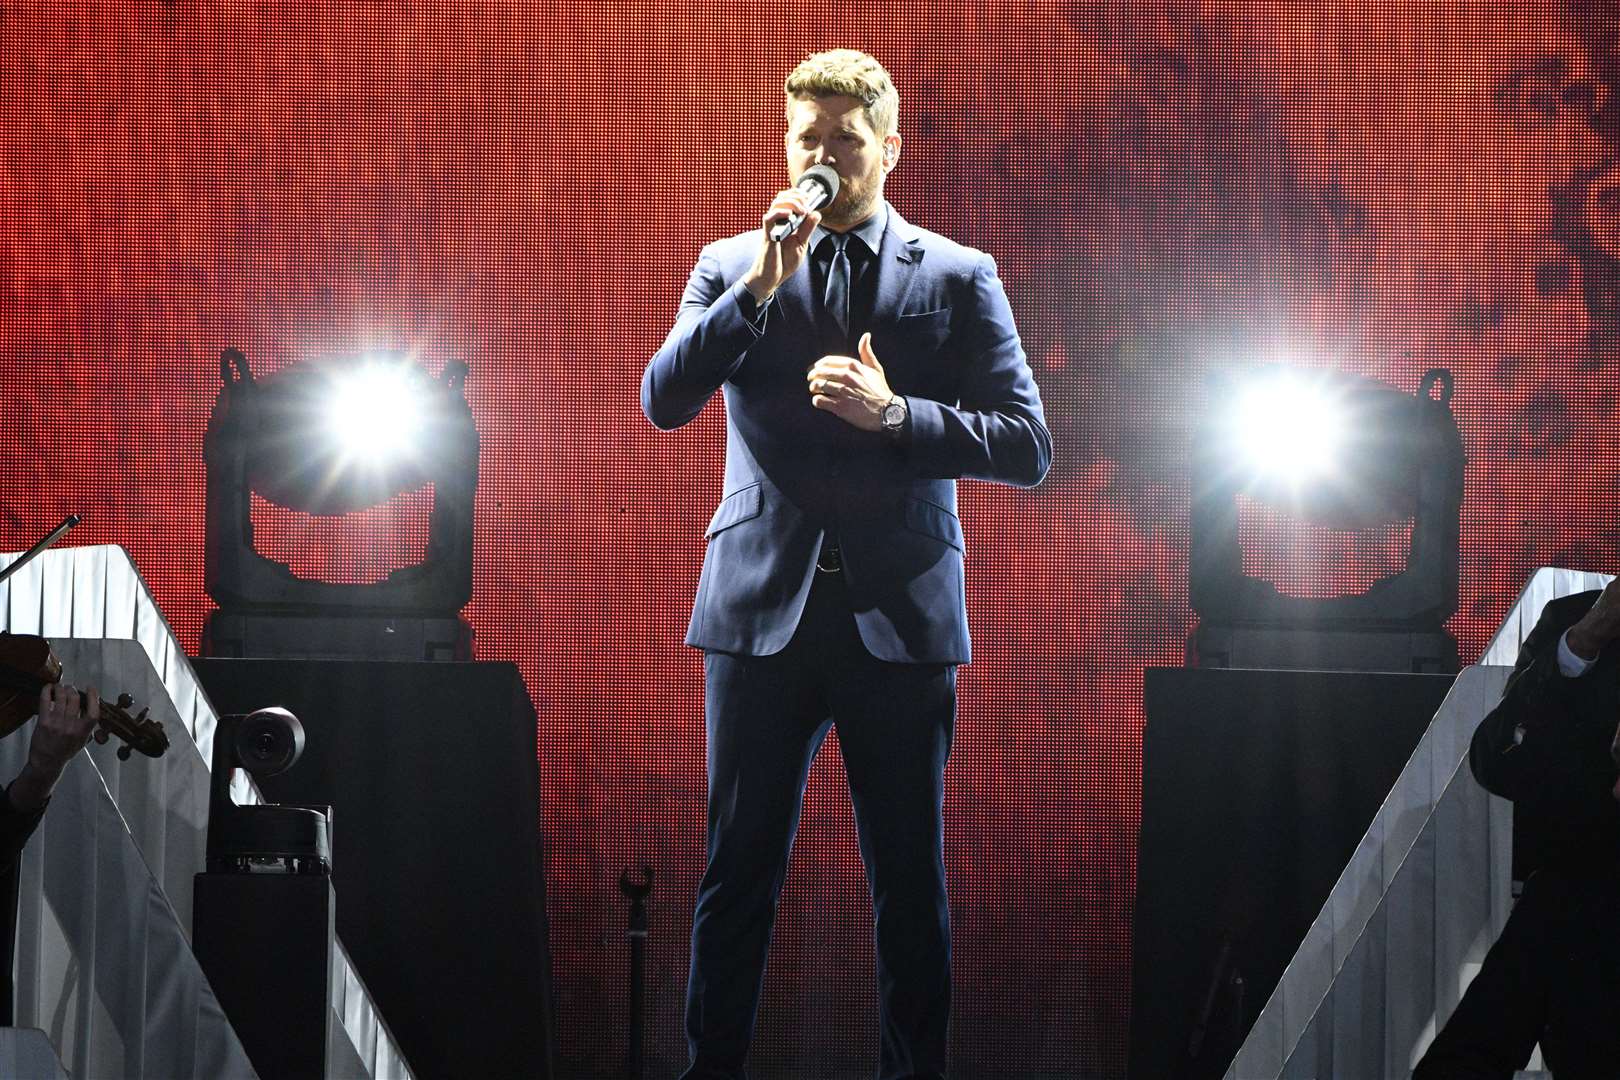 Singing superstar Michael Bublé on stage at Kent Cricket Club's Spitfire Ground St Lawrence, in Canterbury. Picture: Barry Goodwin